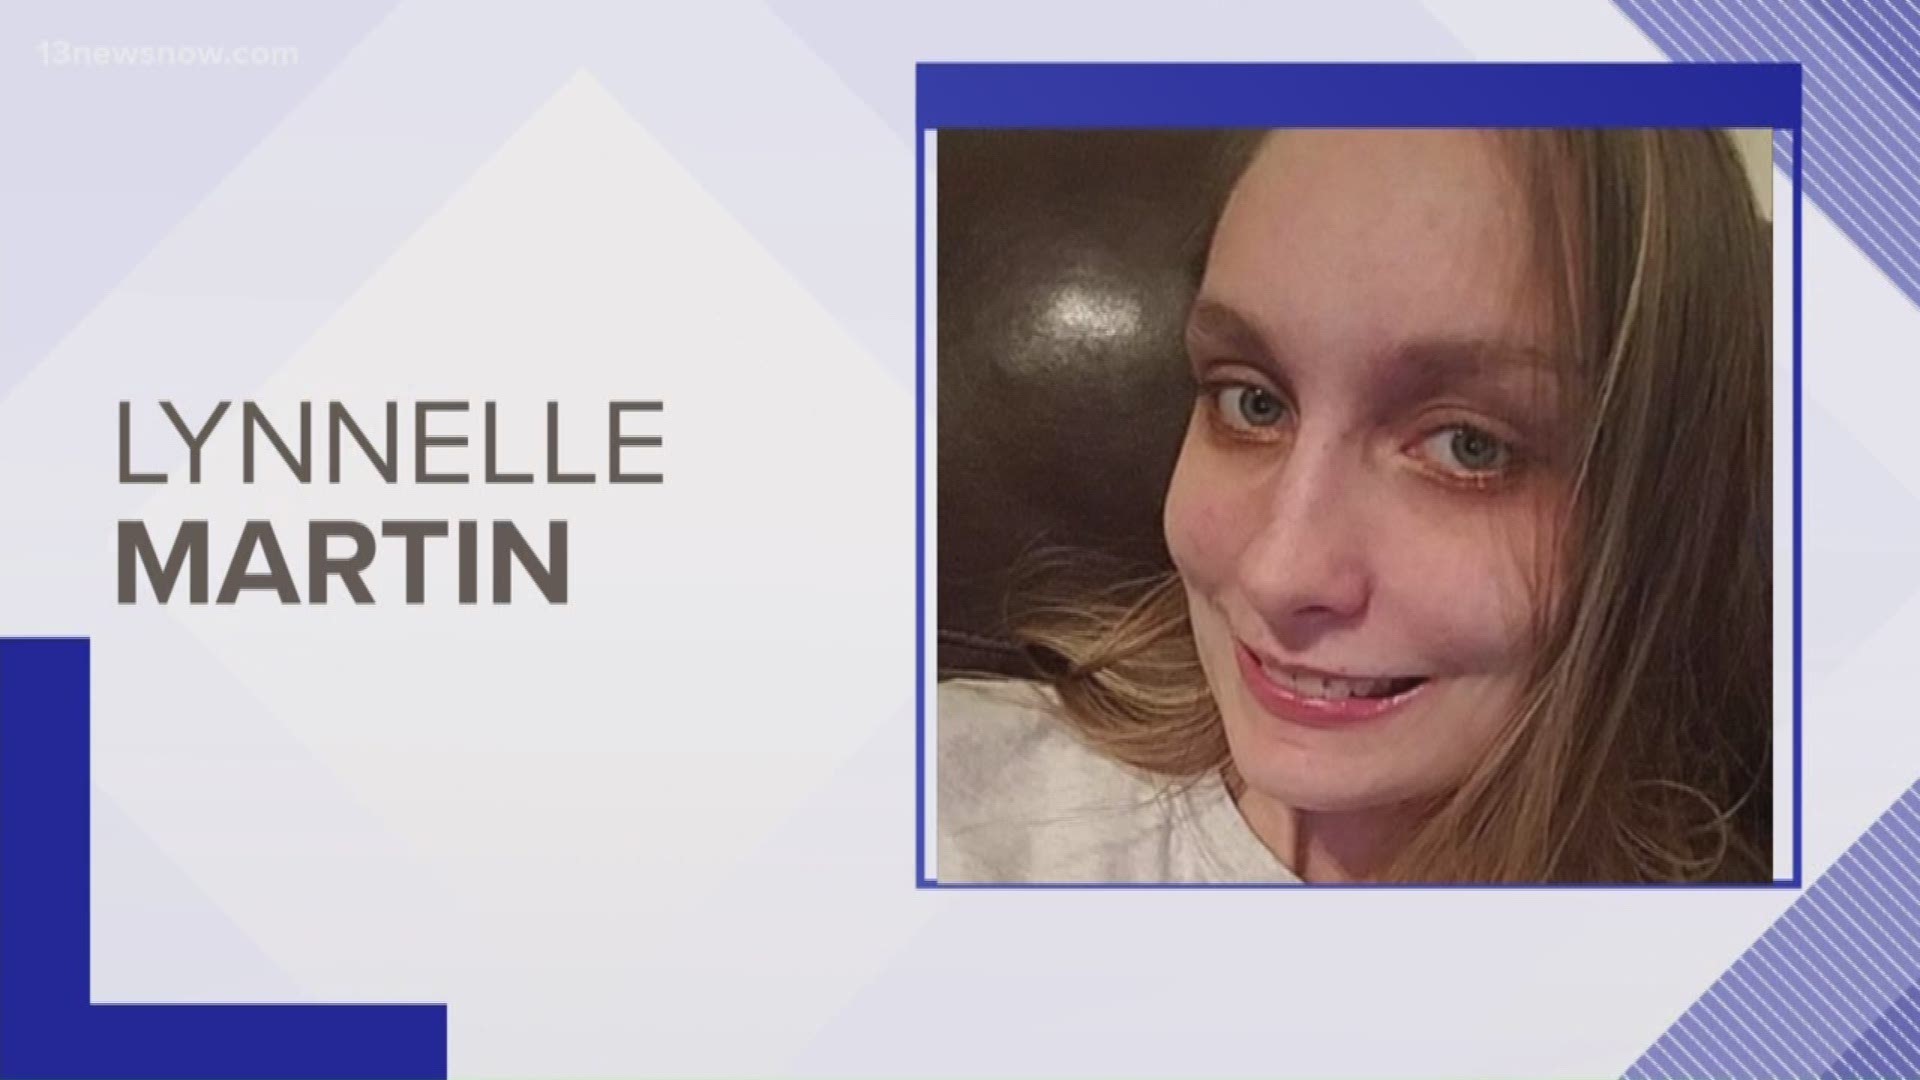 Lynelle Martin went missing in Suffolk but was found a day later by law enforcement.